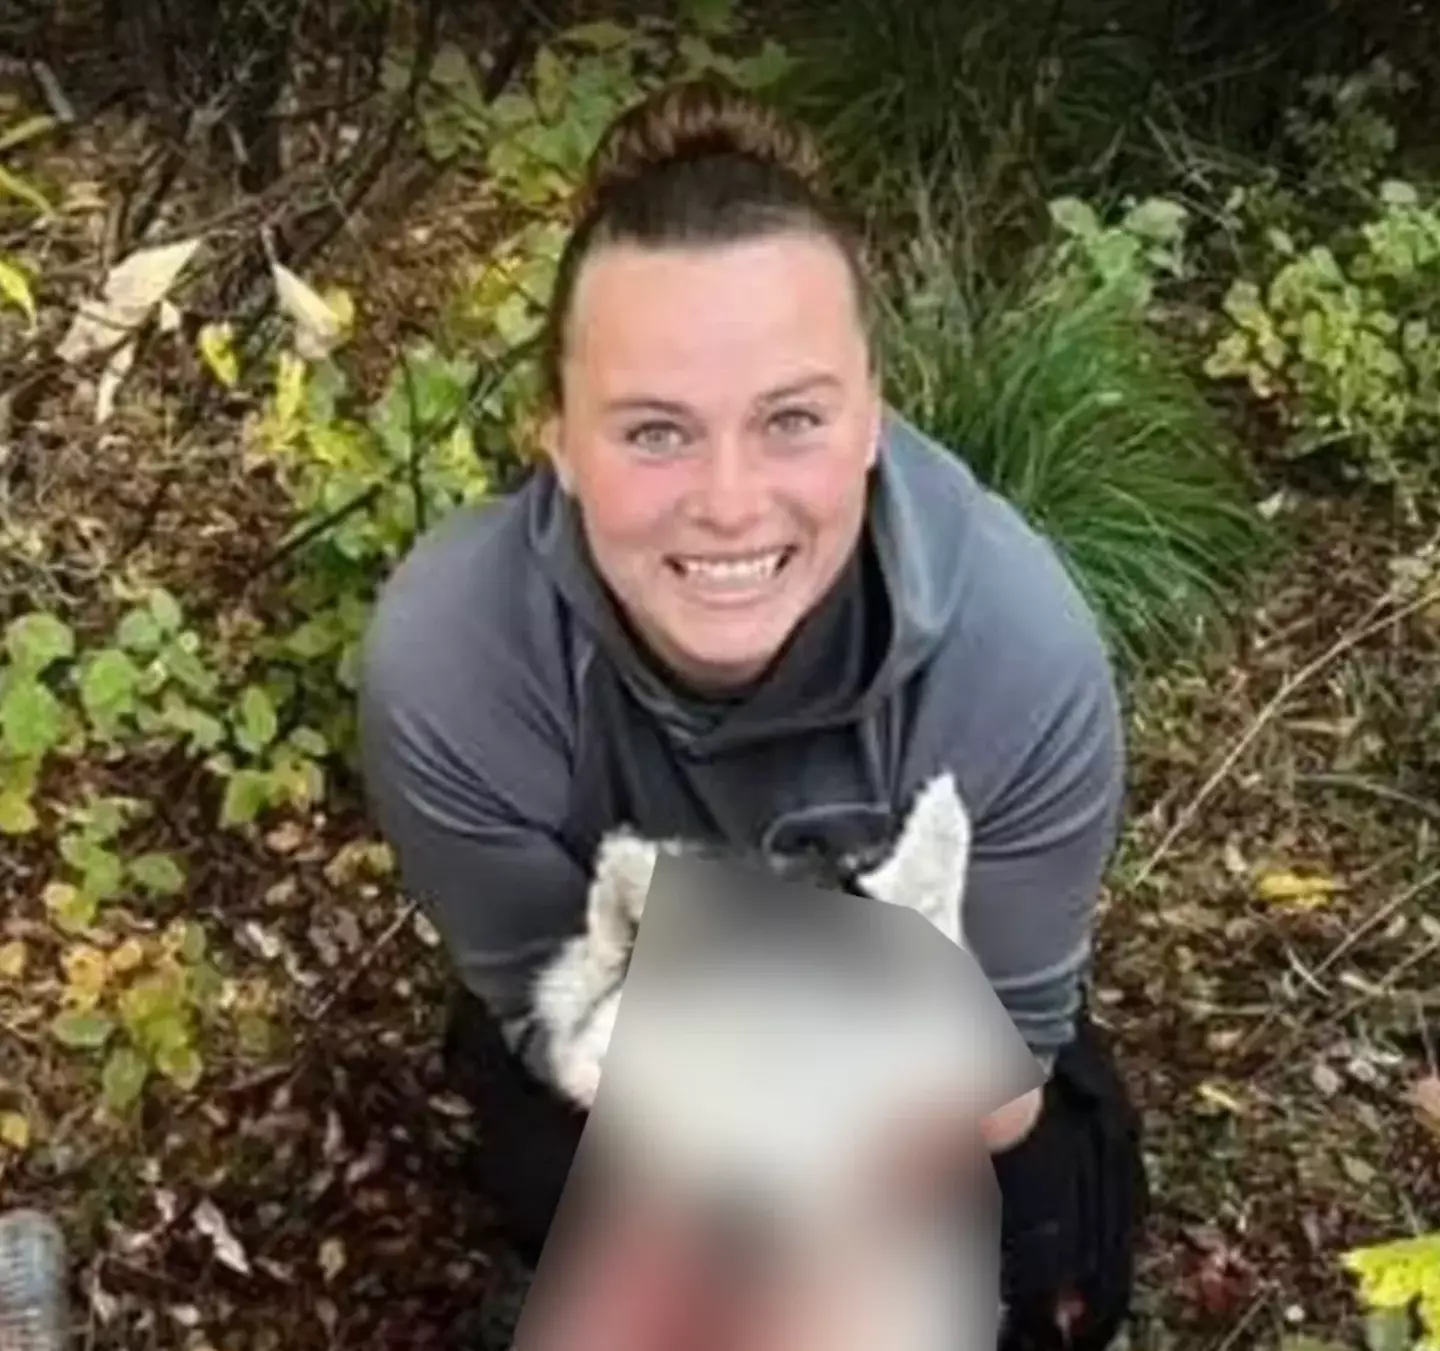 Barnes brazenly posted pictures of herself posting with the dead animal on social media.